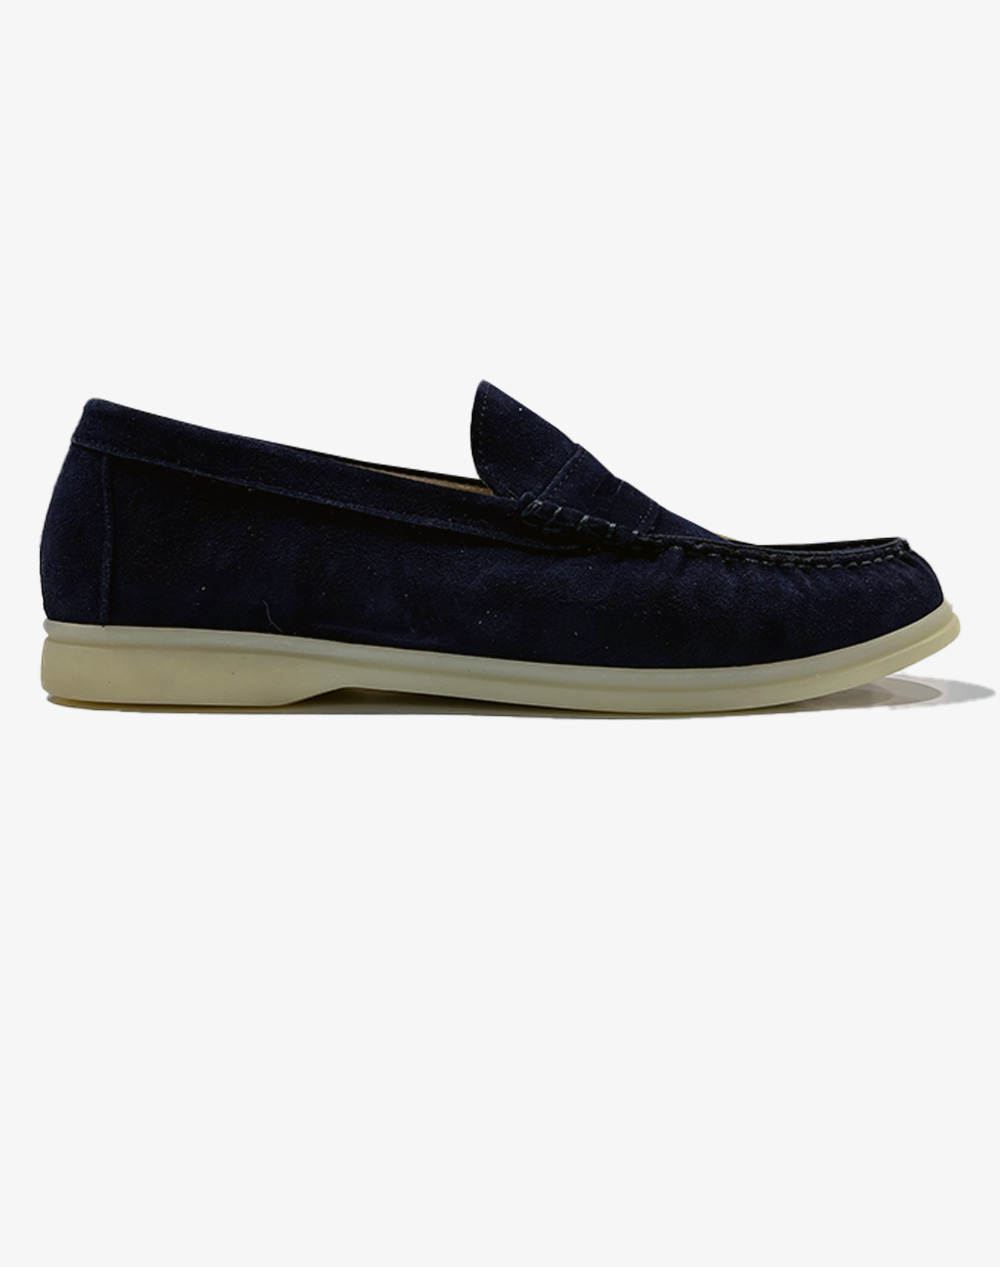 CHICAGO SHOES 124-5.0947-831-NAVY SUEDE NavyBlue